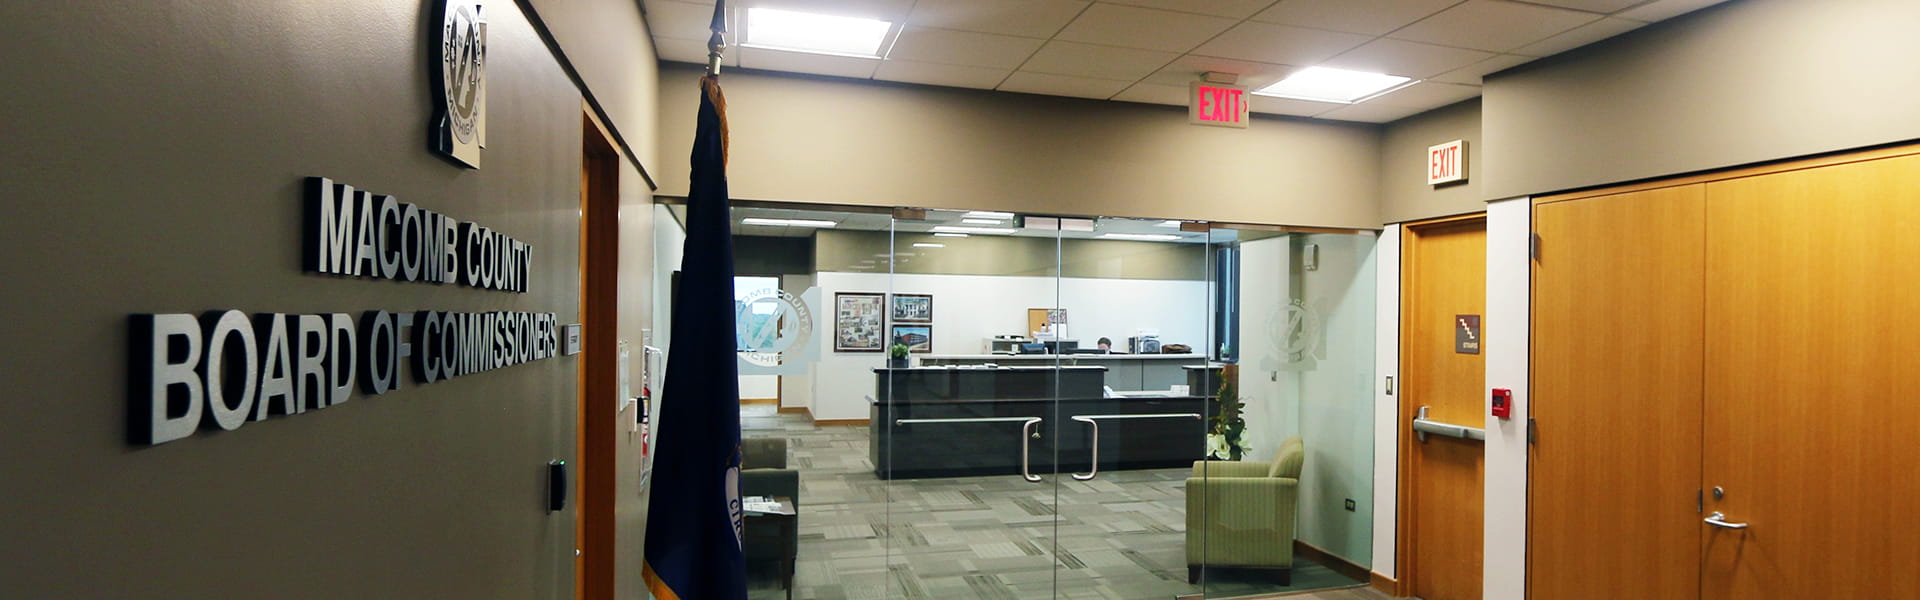 Interior of Macomb County Board of Commissioners lobby and hallway.